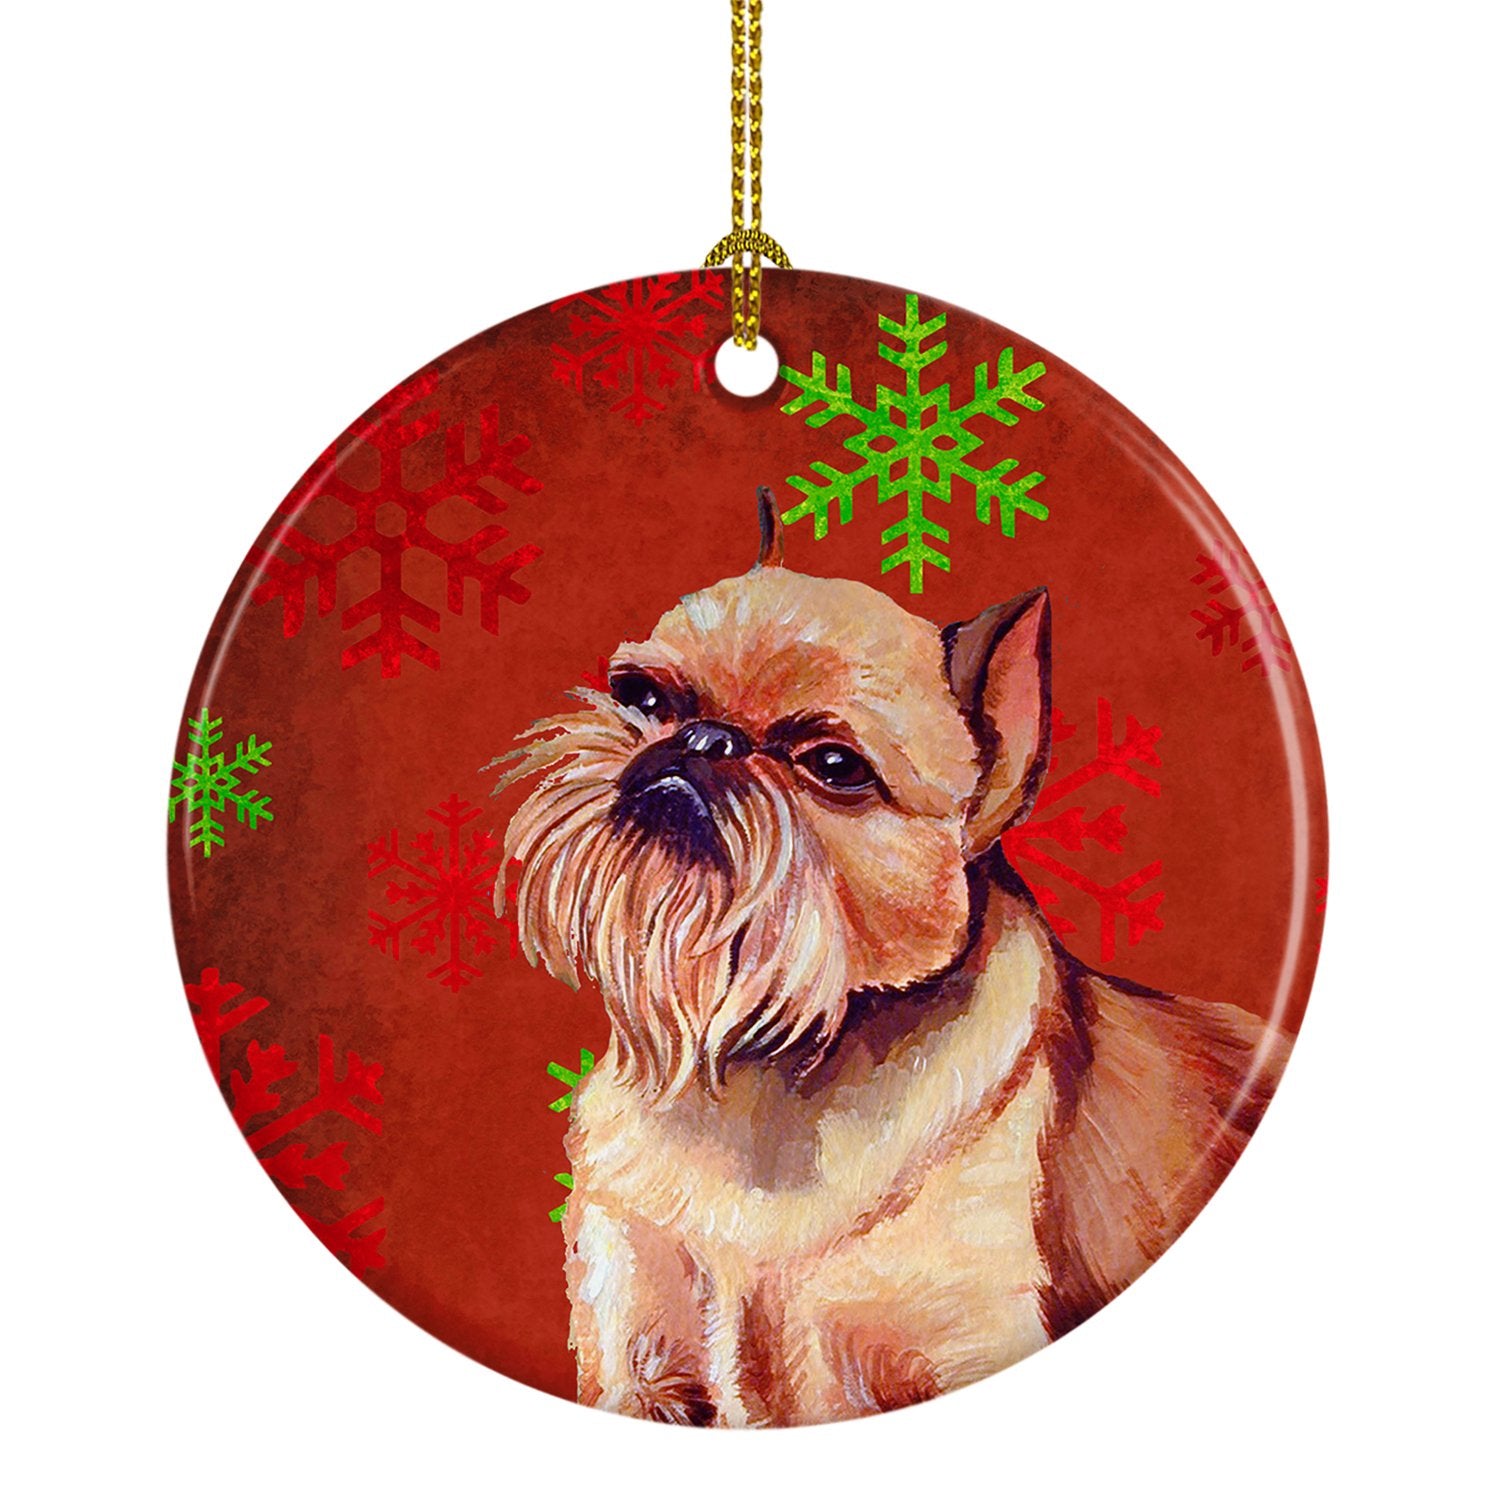 Brussels Griffon Red Snowflake Holiday Christmas Ceramic Ornament LH9314 by Caroline's Treasures